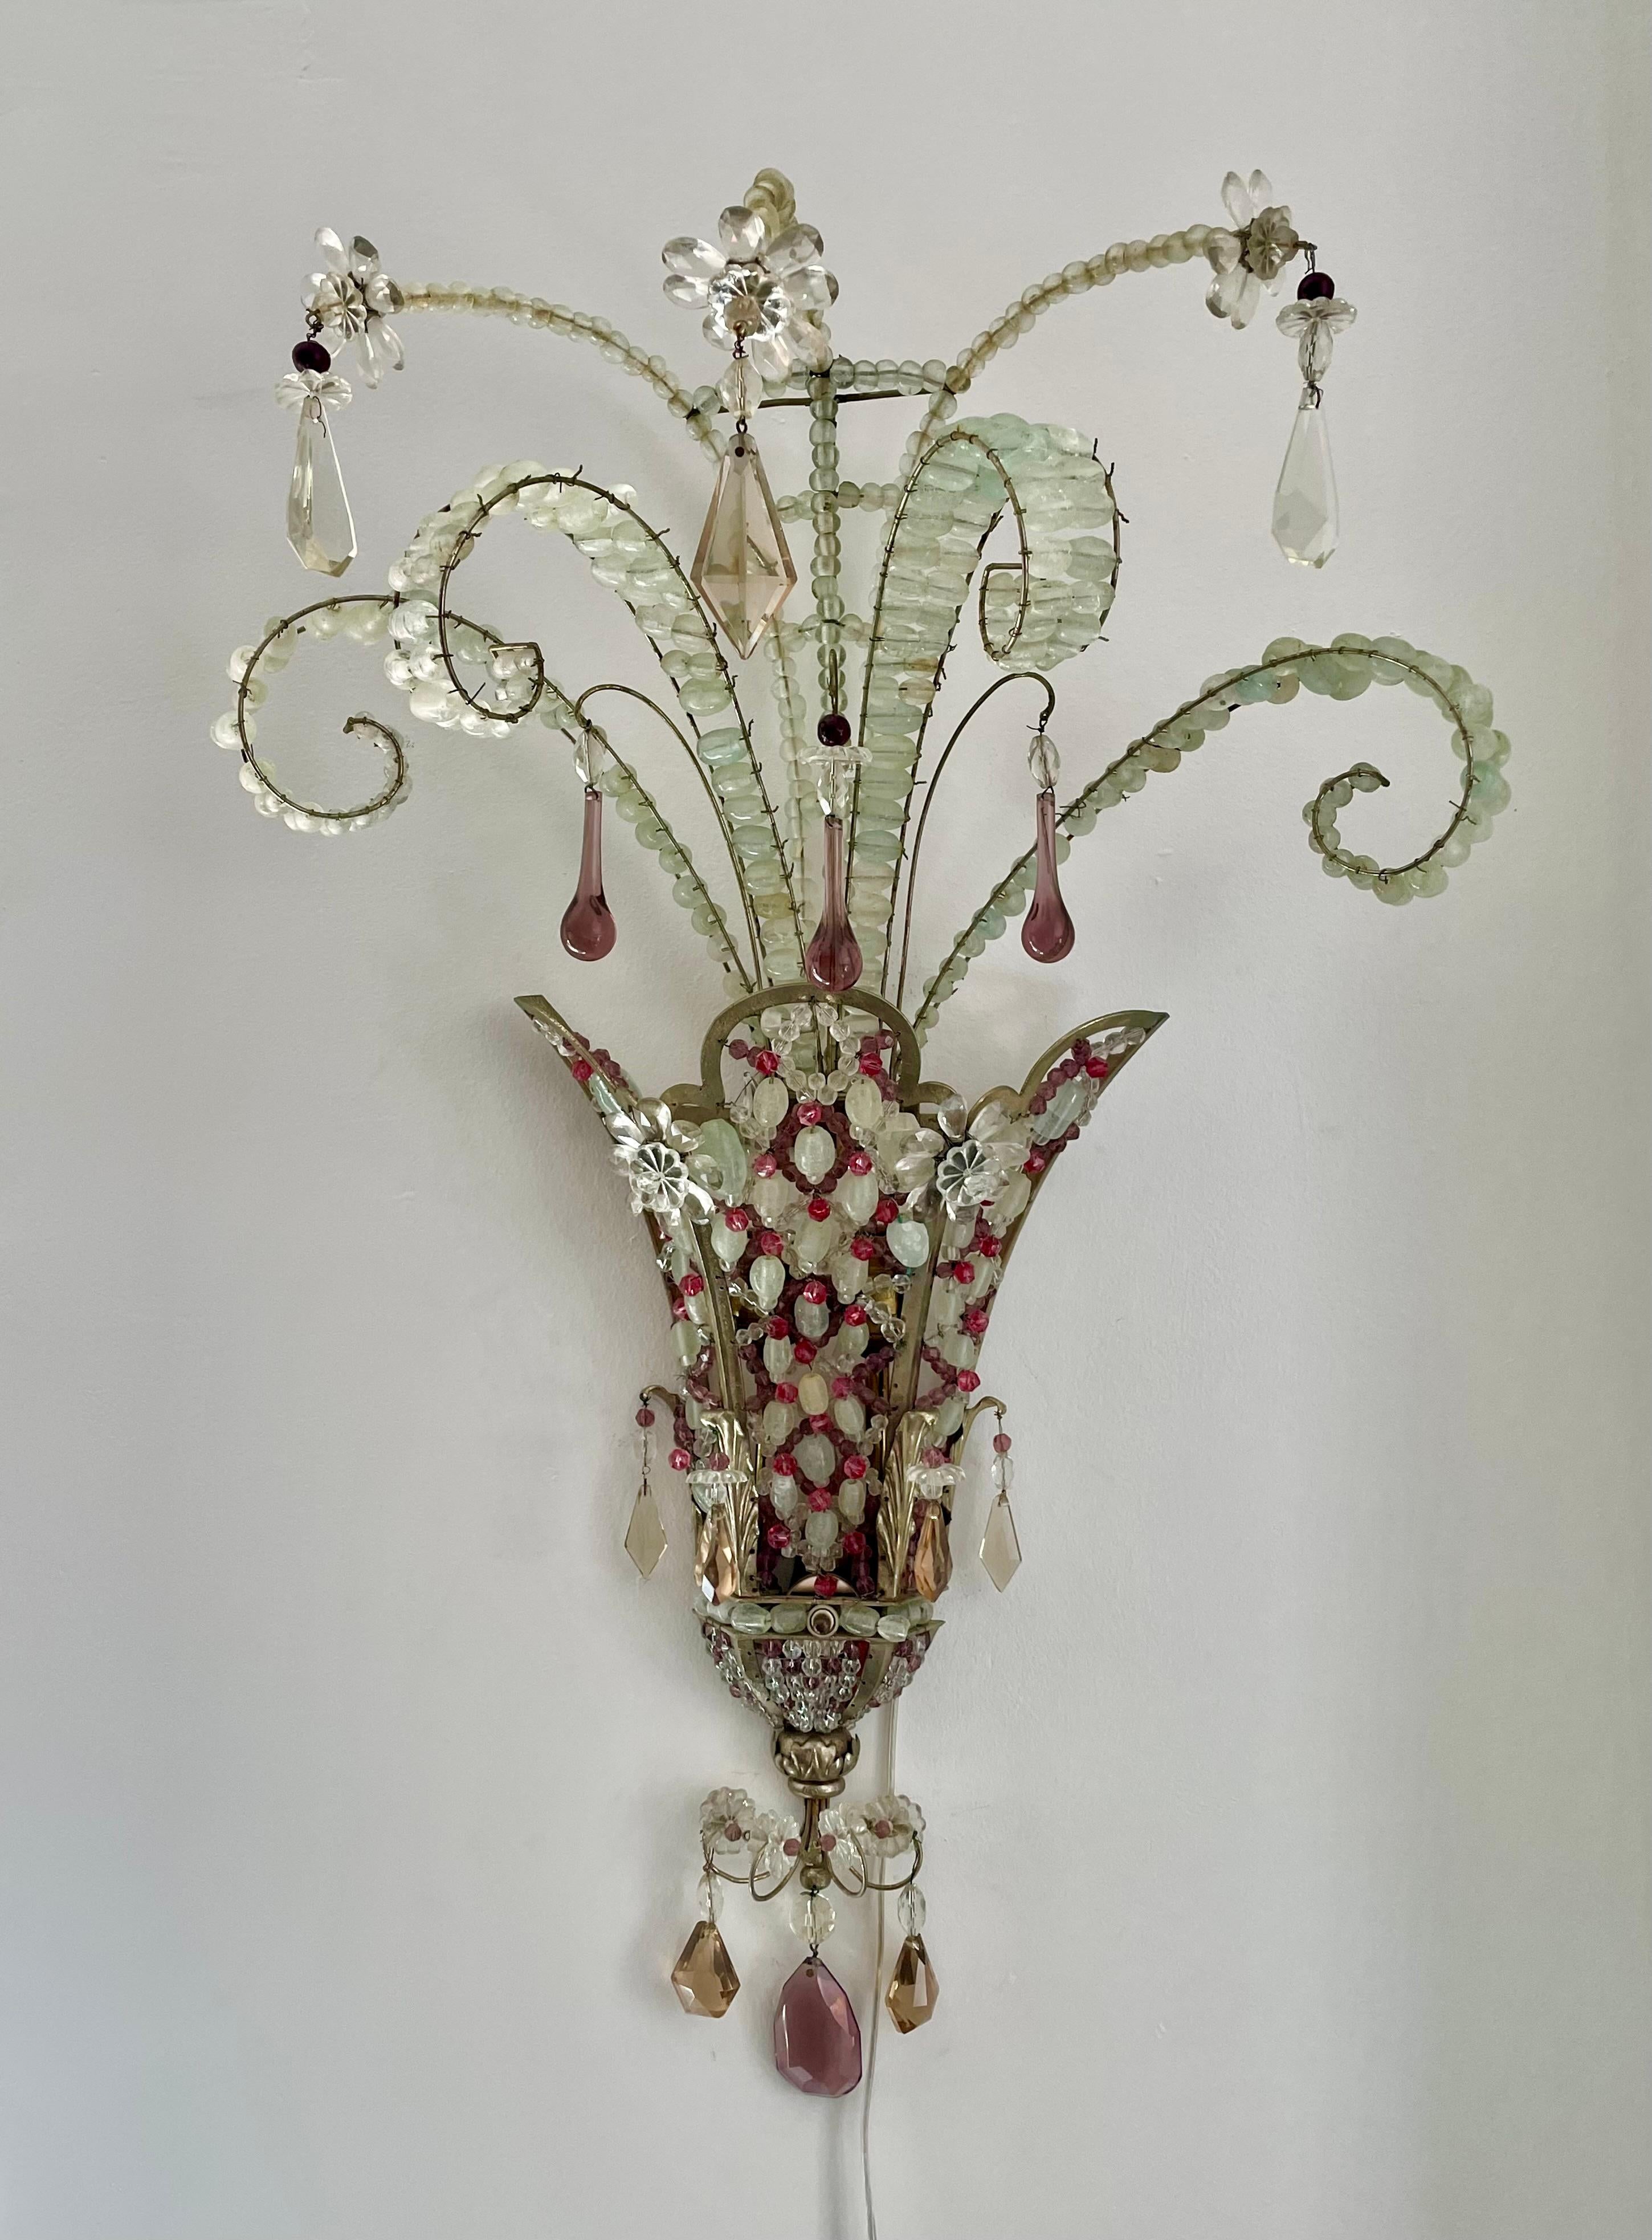 Madcap, whimsical, spritely, over-the-top -- these are just a few of the adjectives that spring to mind in describing this stylish pair of 1920s French sconces.  Their steel frames are silvered, strewn with crystal prisms and cut-and-blown-glass